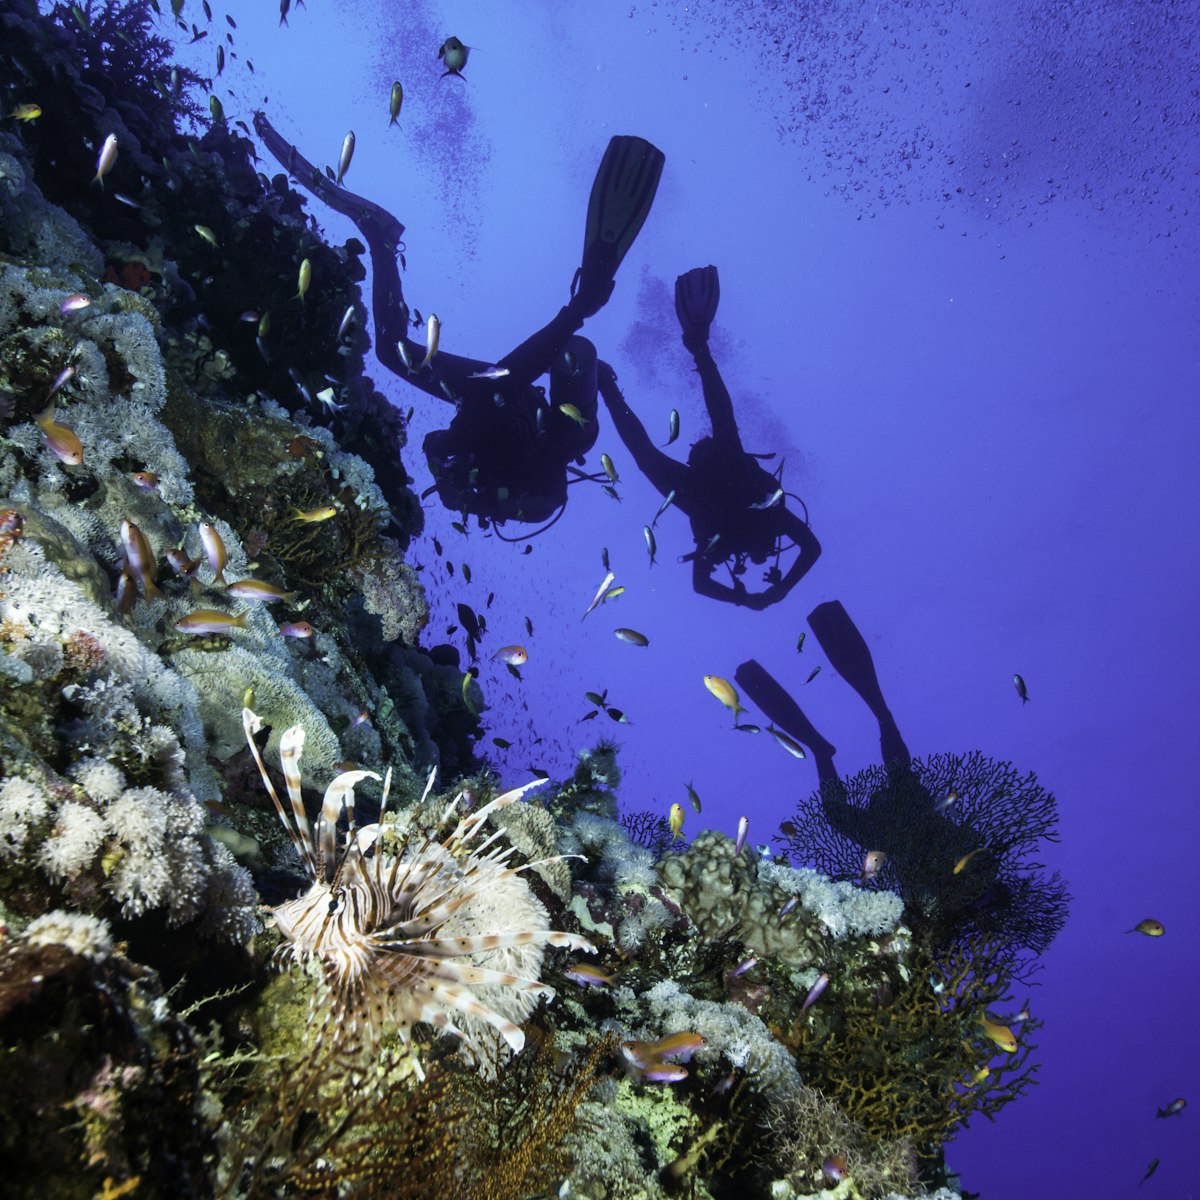 Underwater scene with a lionfish and a group of scuba divers at the famous Elphinstone at Egypt.
